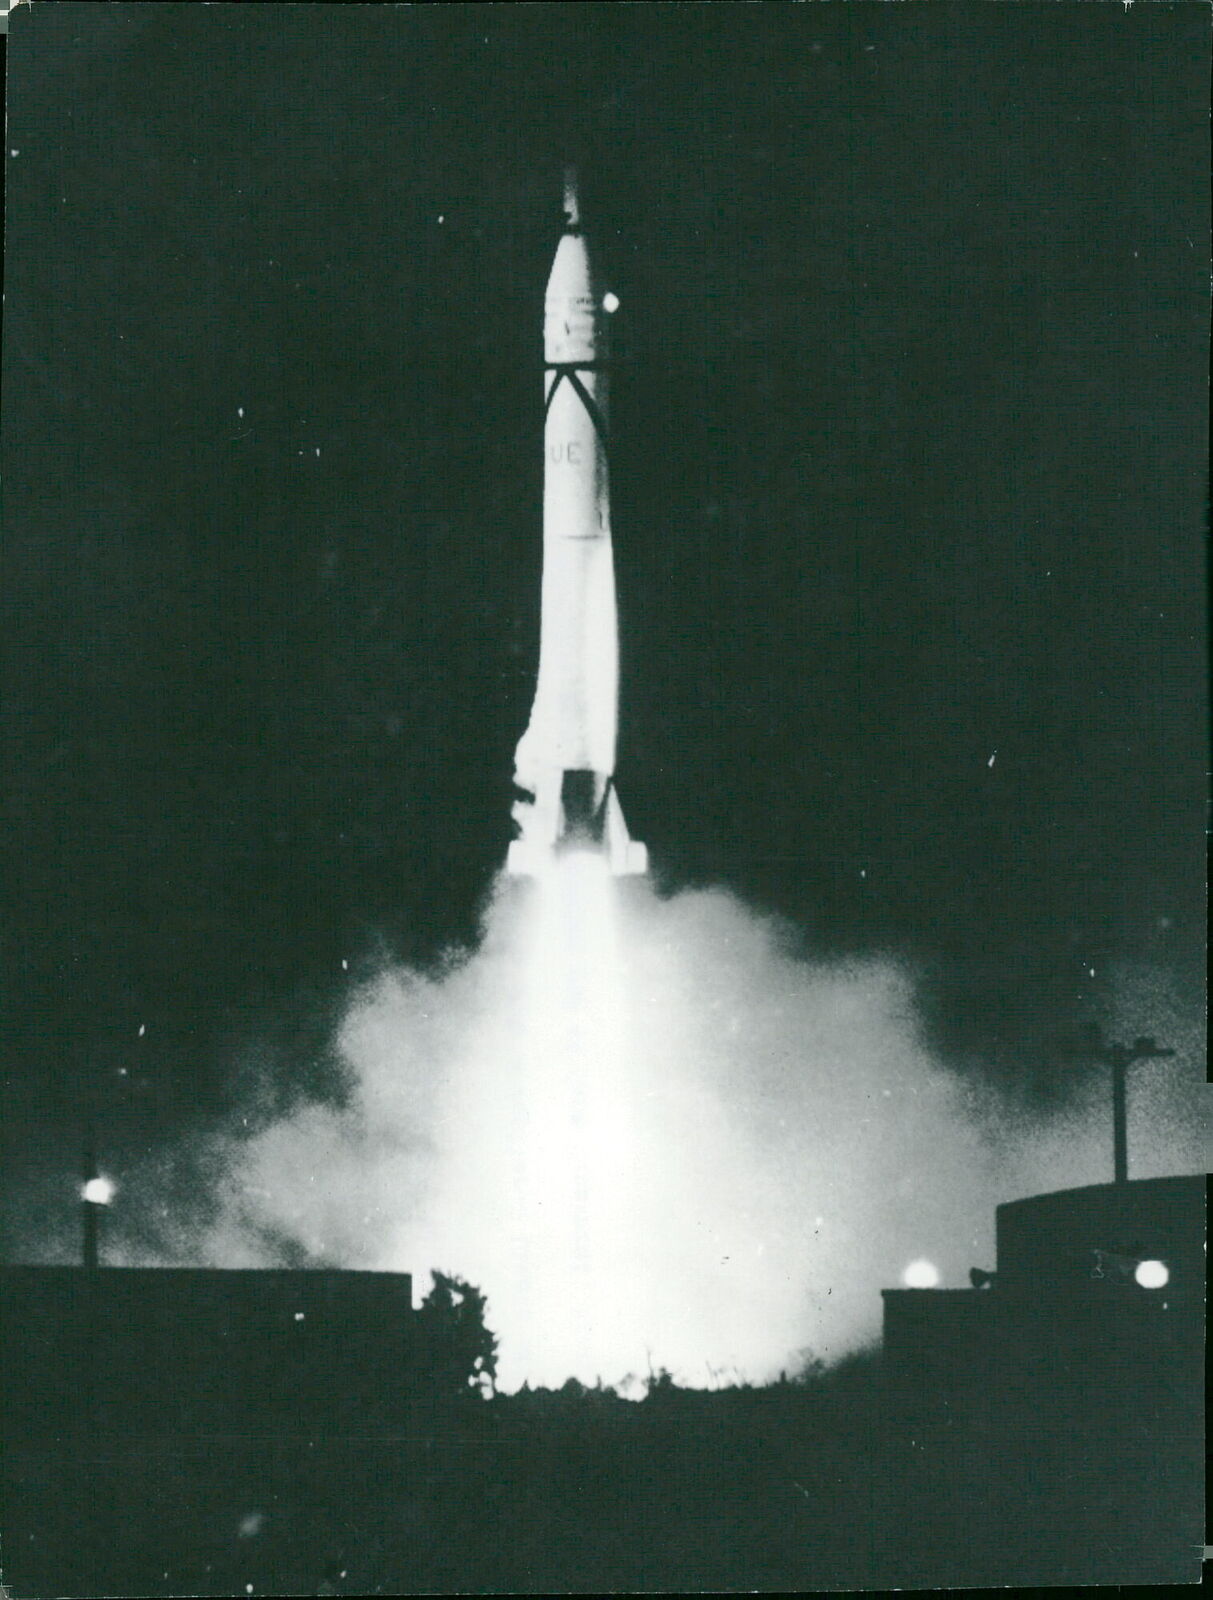 J.S Launches Earth Satellite With Jupiter C Rocket - Vintage Photograph 2335377